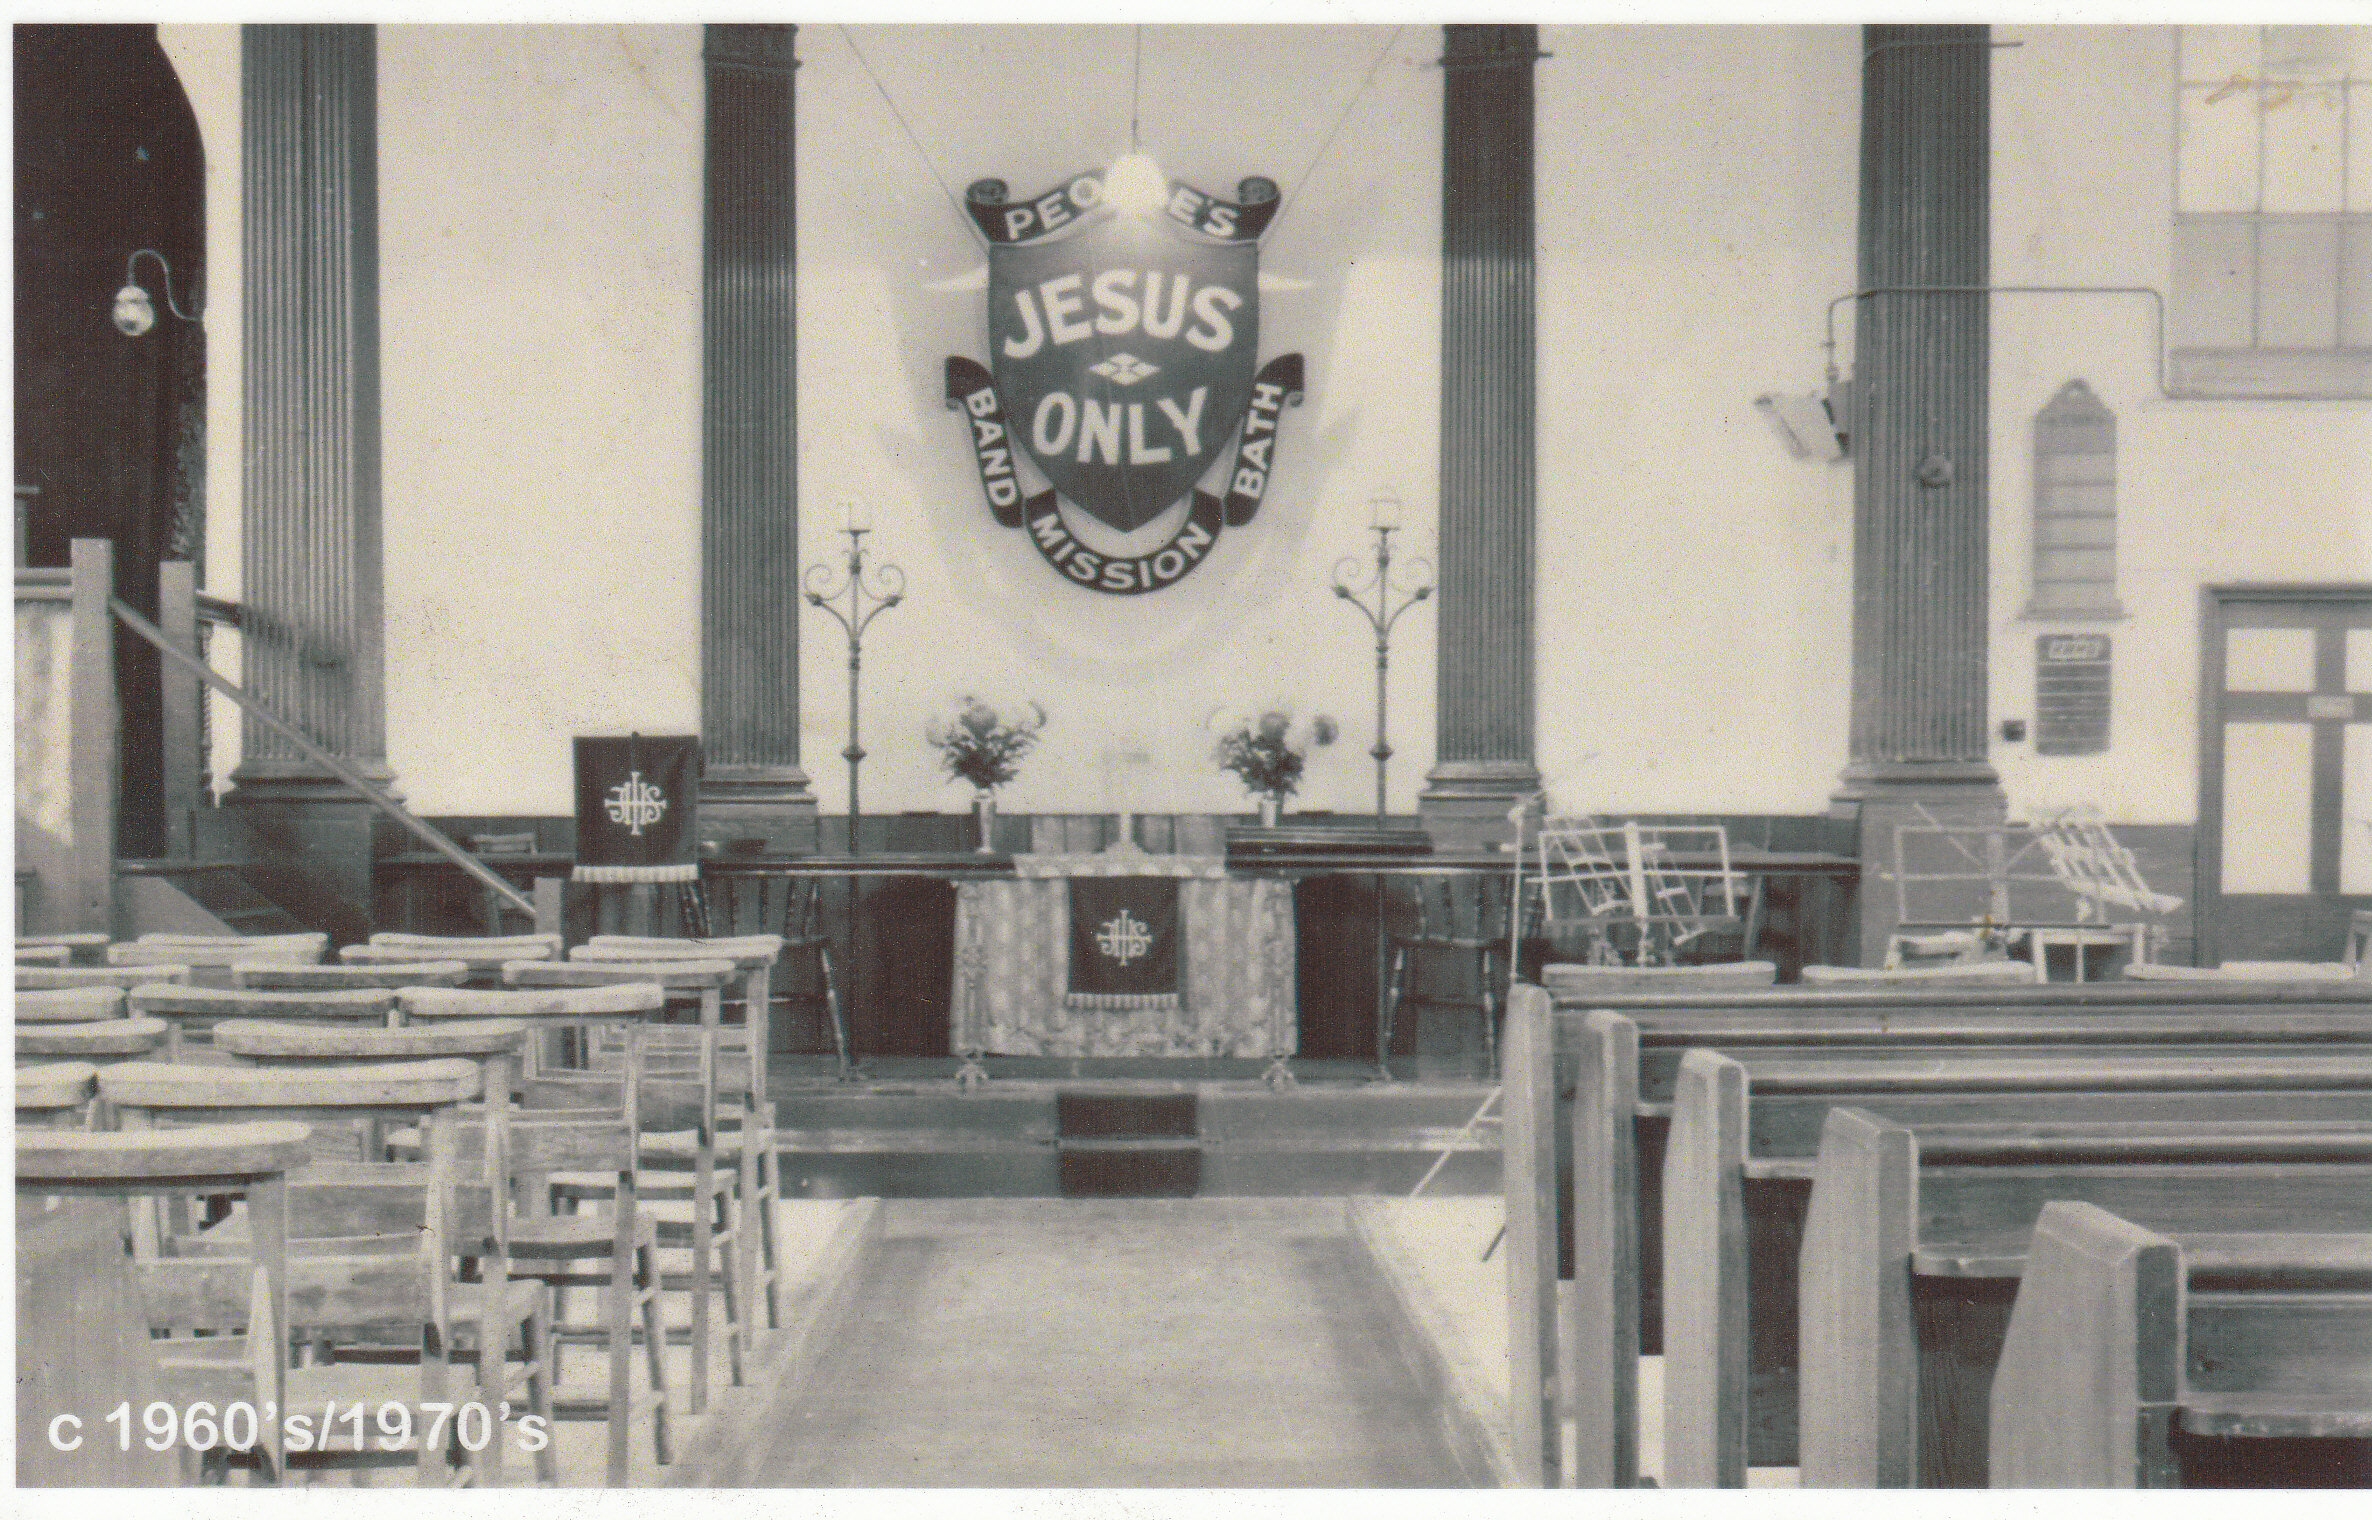 The People's Mission interior